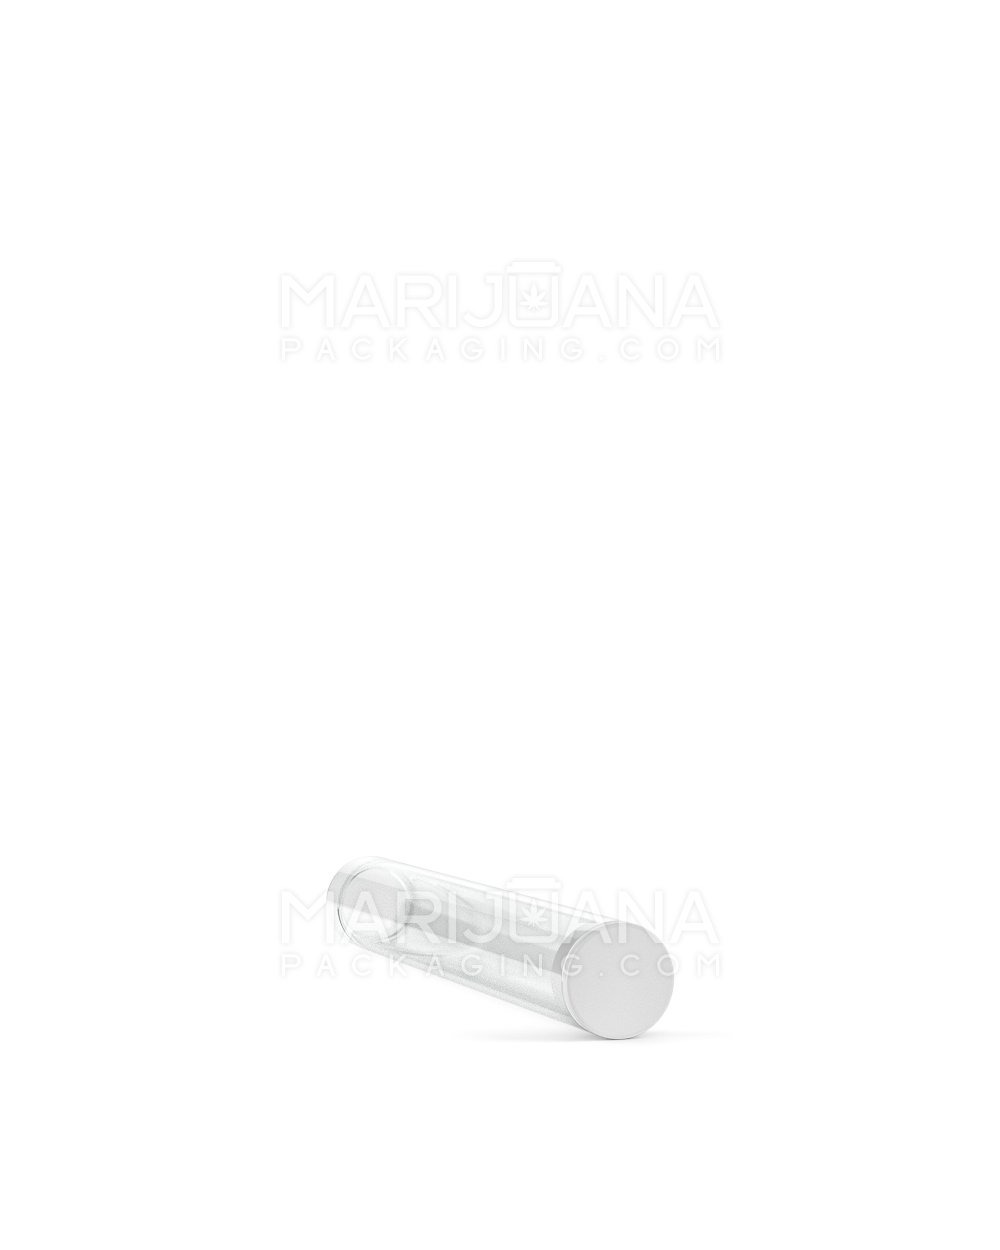 Buttonless Vape Cartridge Tube w/ White Cap | 86mm - Clear Plastic - 500 Count - 4